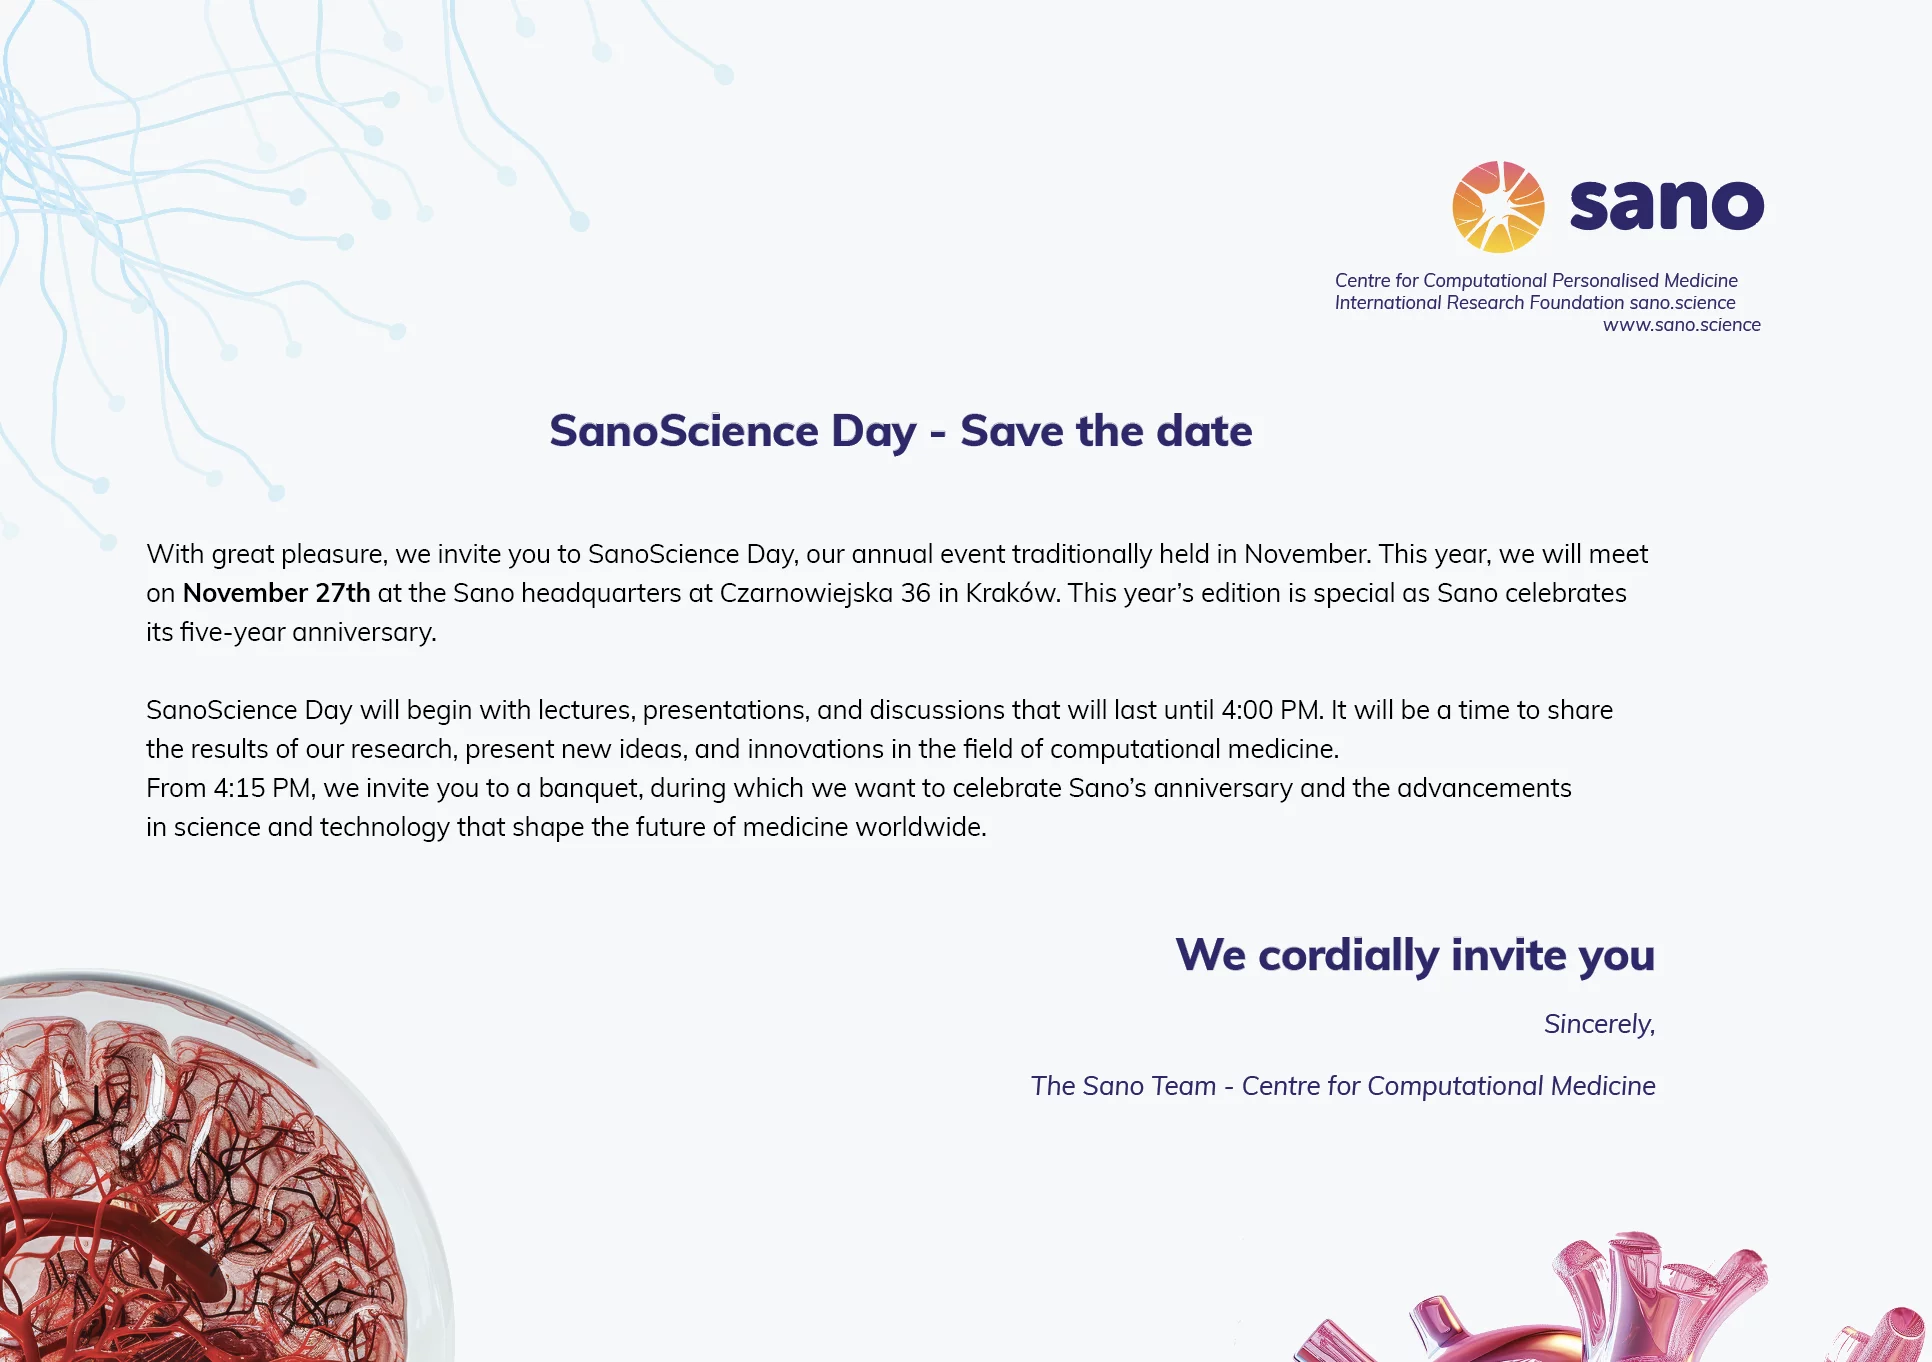 SanoScience Day - Save the date